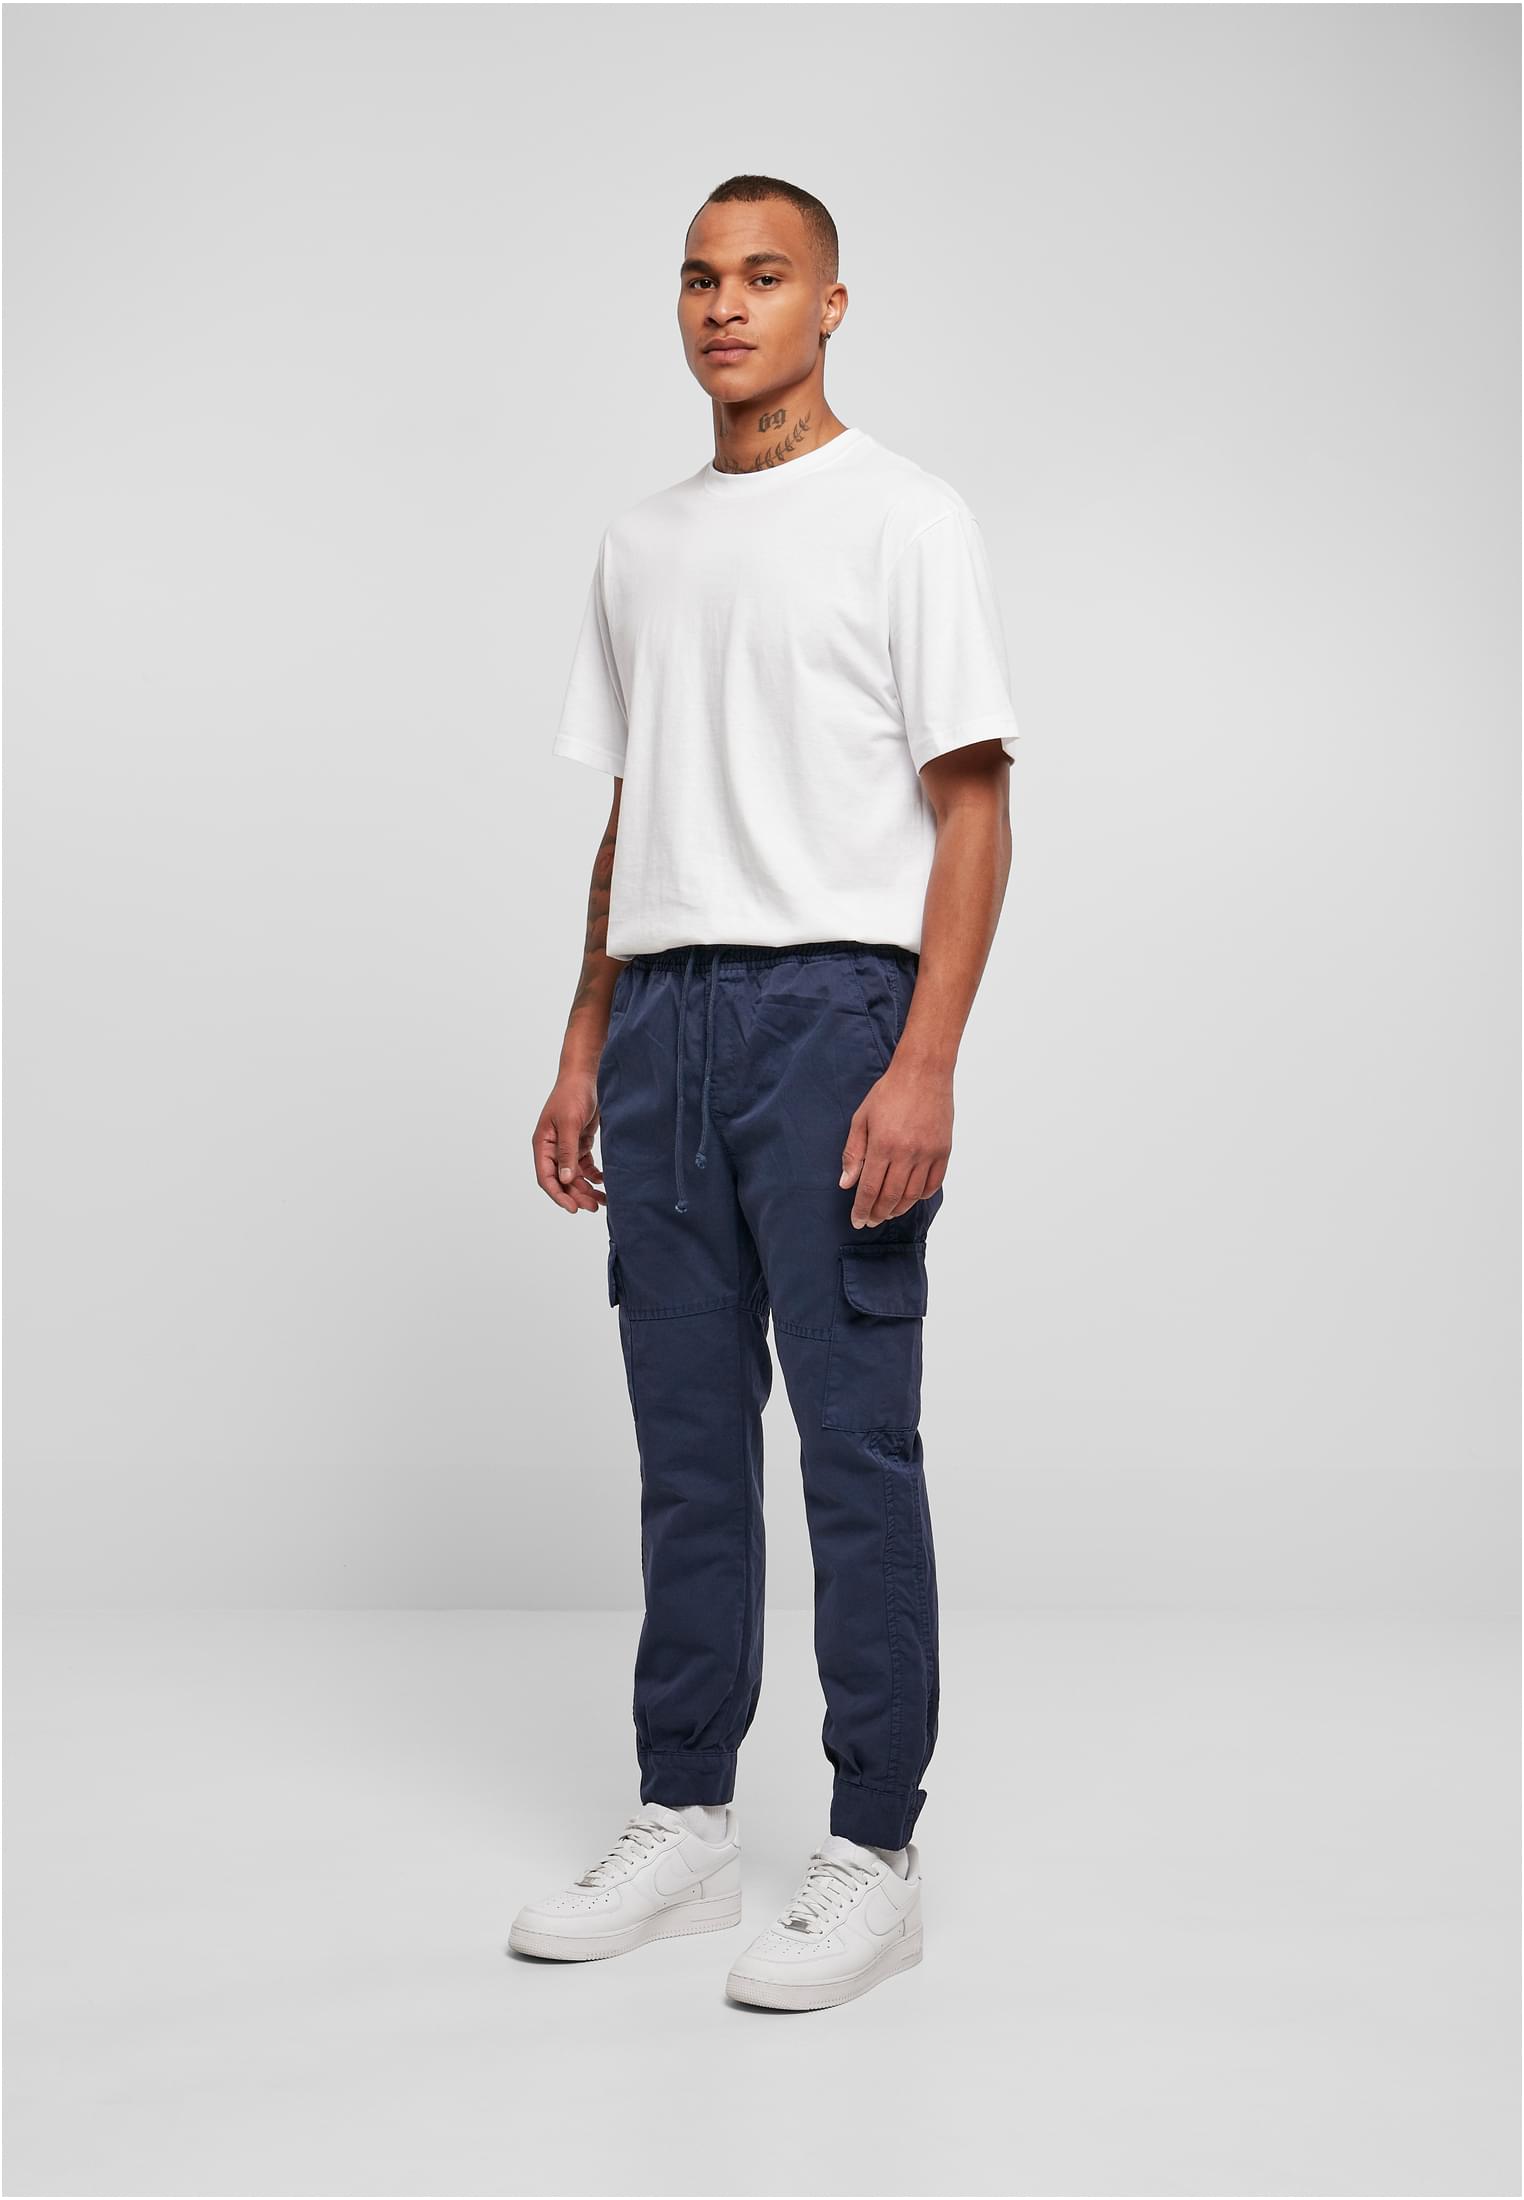 Sweatpants Military Jogg Pants in Farbe spaceblue